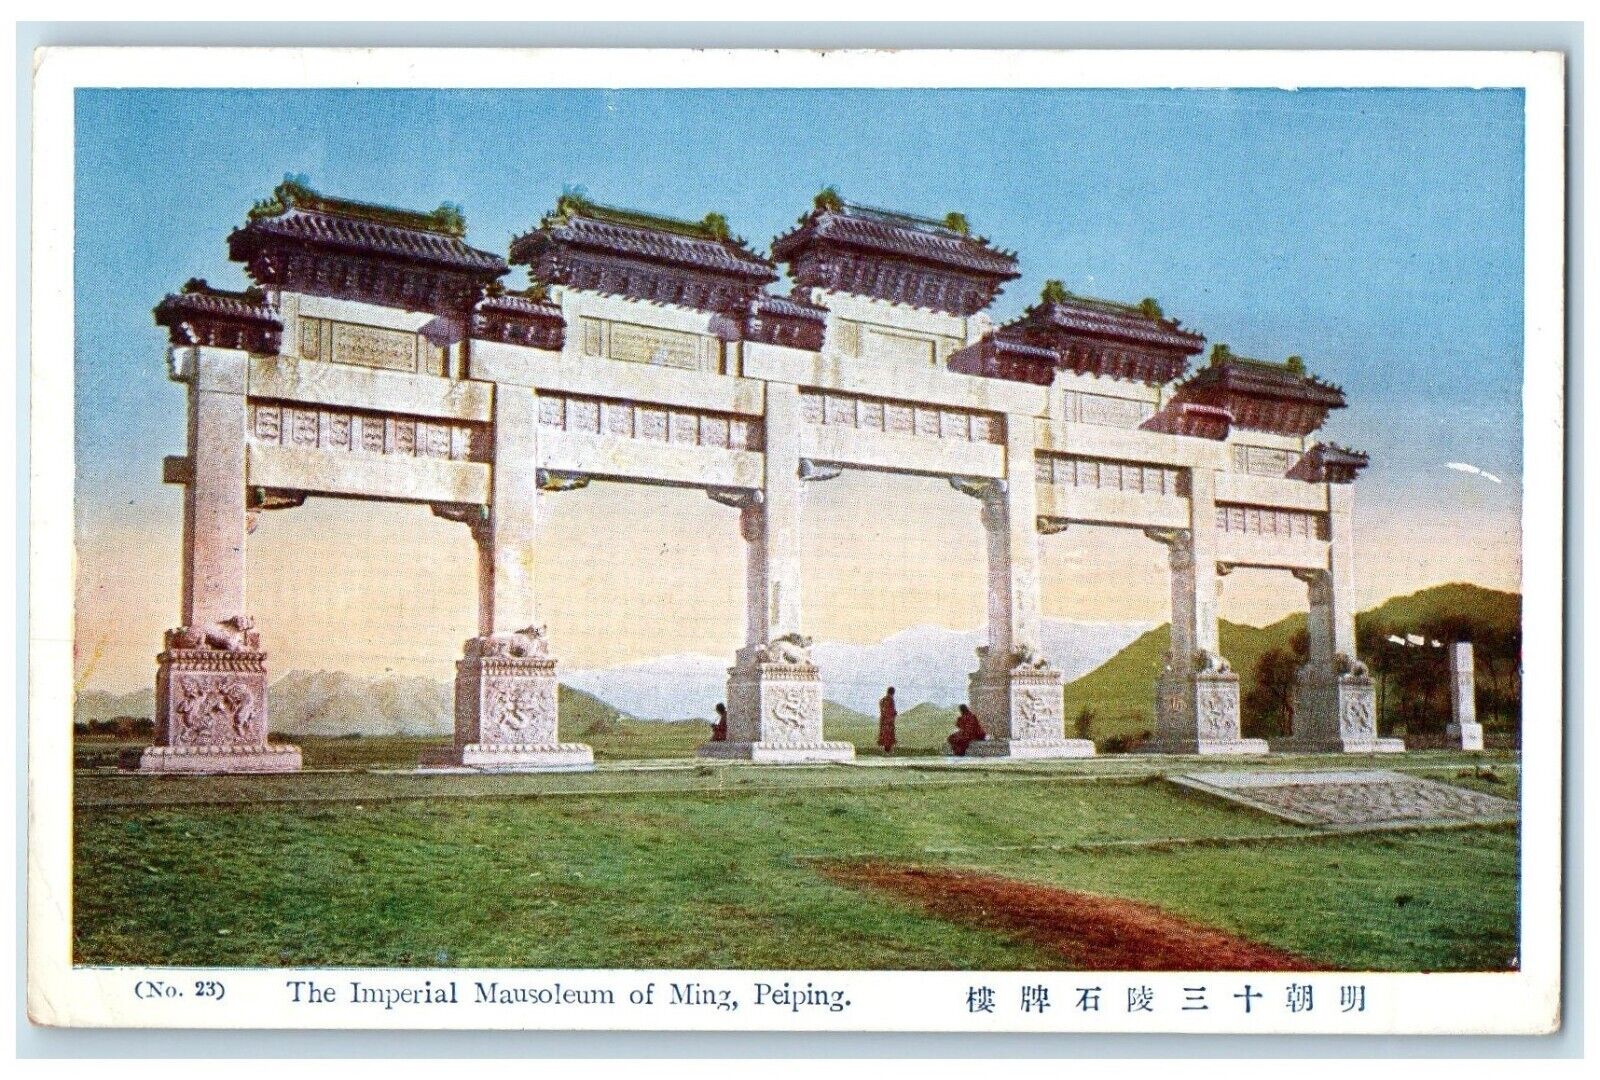 1918 View Of The Imperial Mausoleum Of Ming Peiping China Antique Postcard